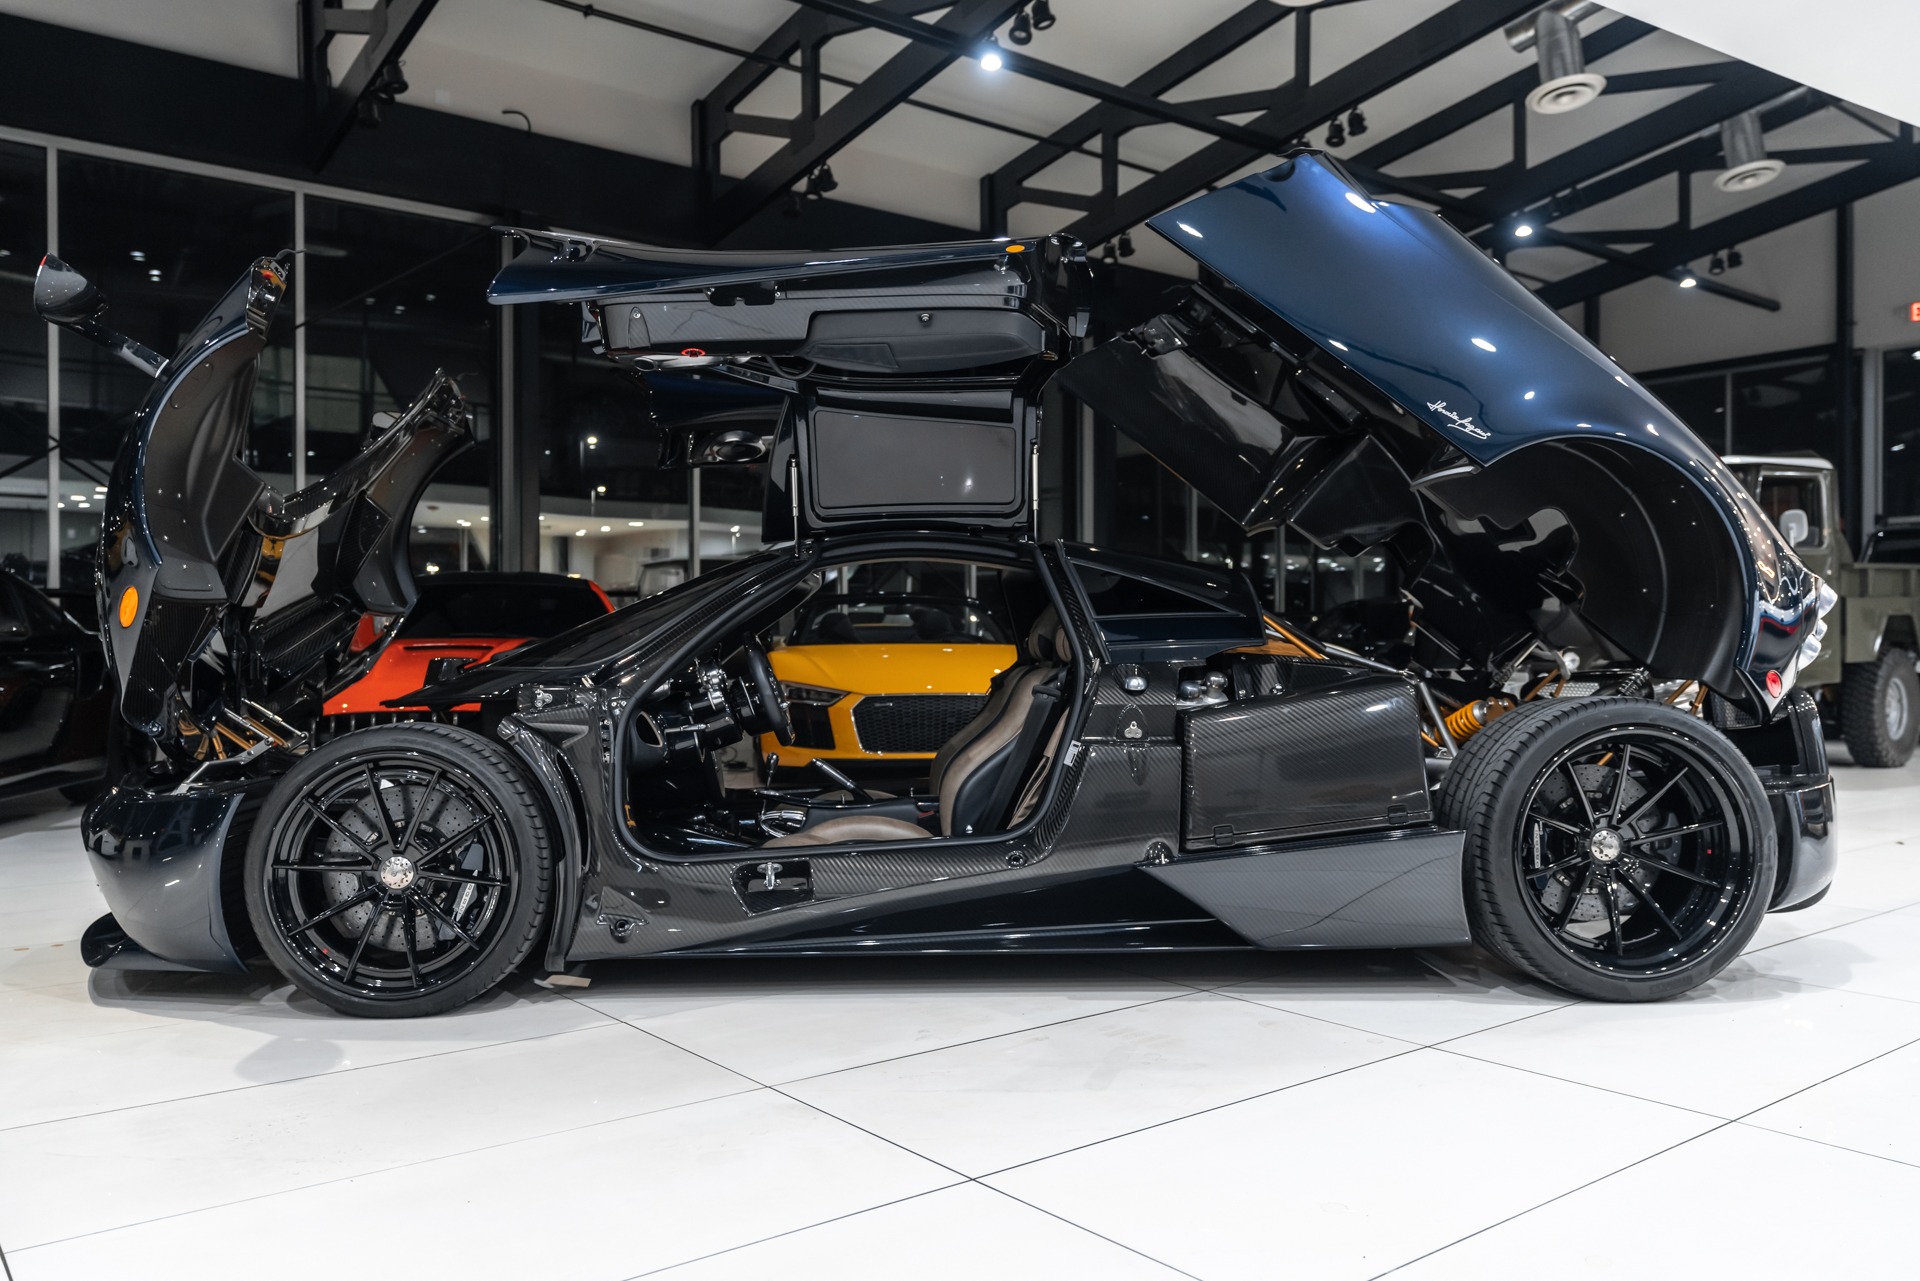 Used-2014-Pagani-Huayra-Coupe-1-of-ONLY-100-Full-Body-PPF-TONS-of-Carbon-Fiber-Service-Records